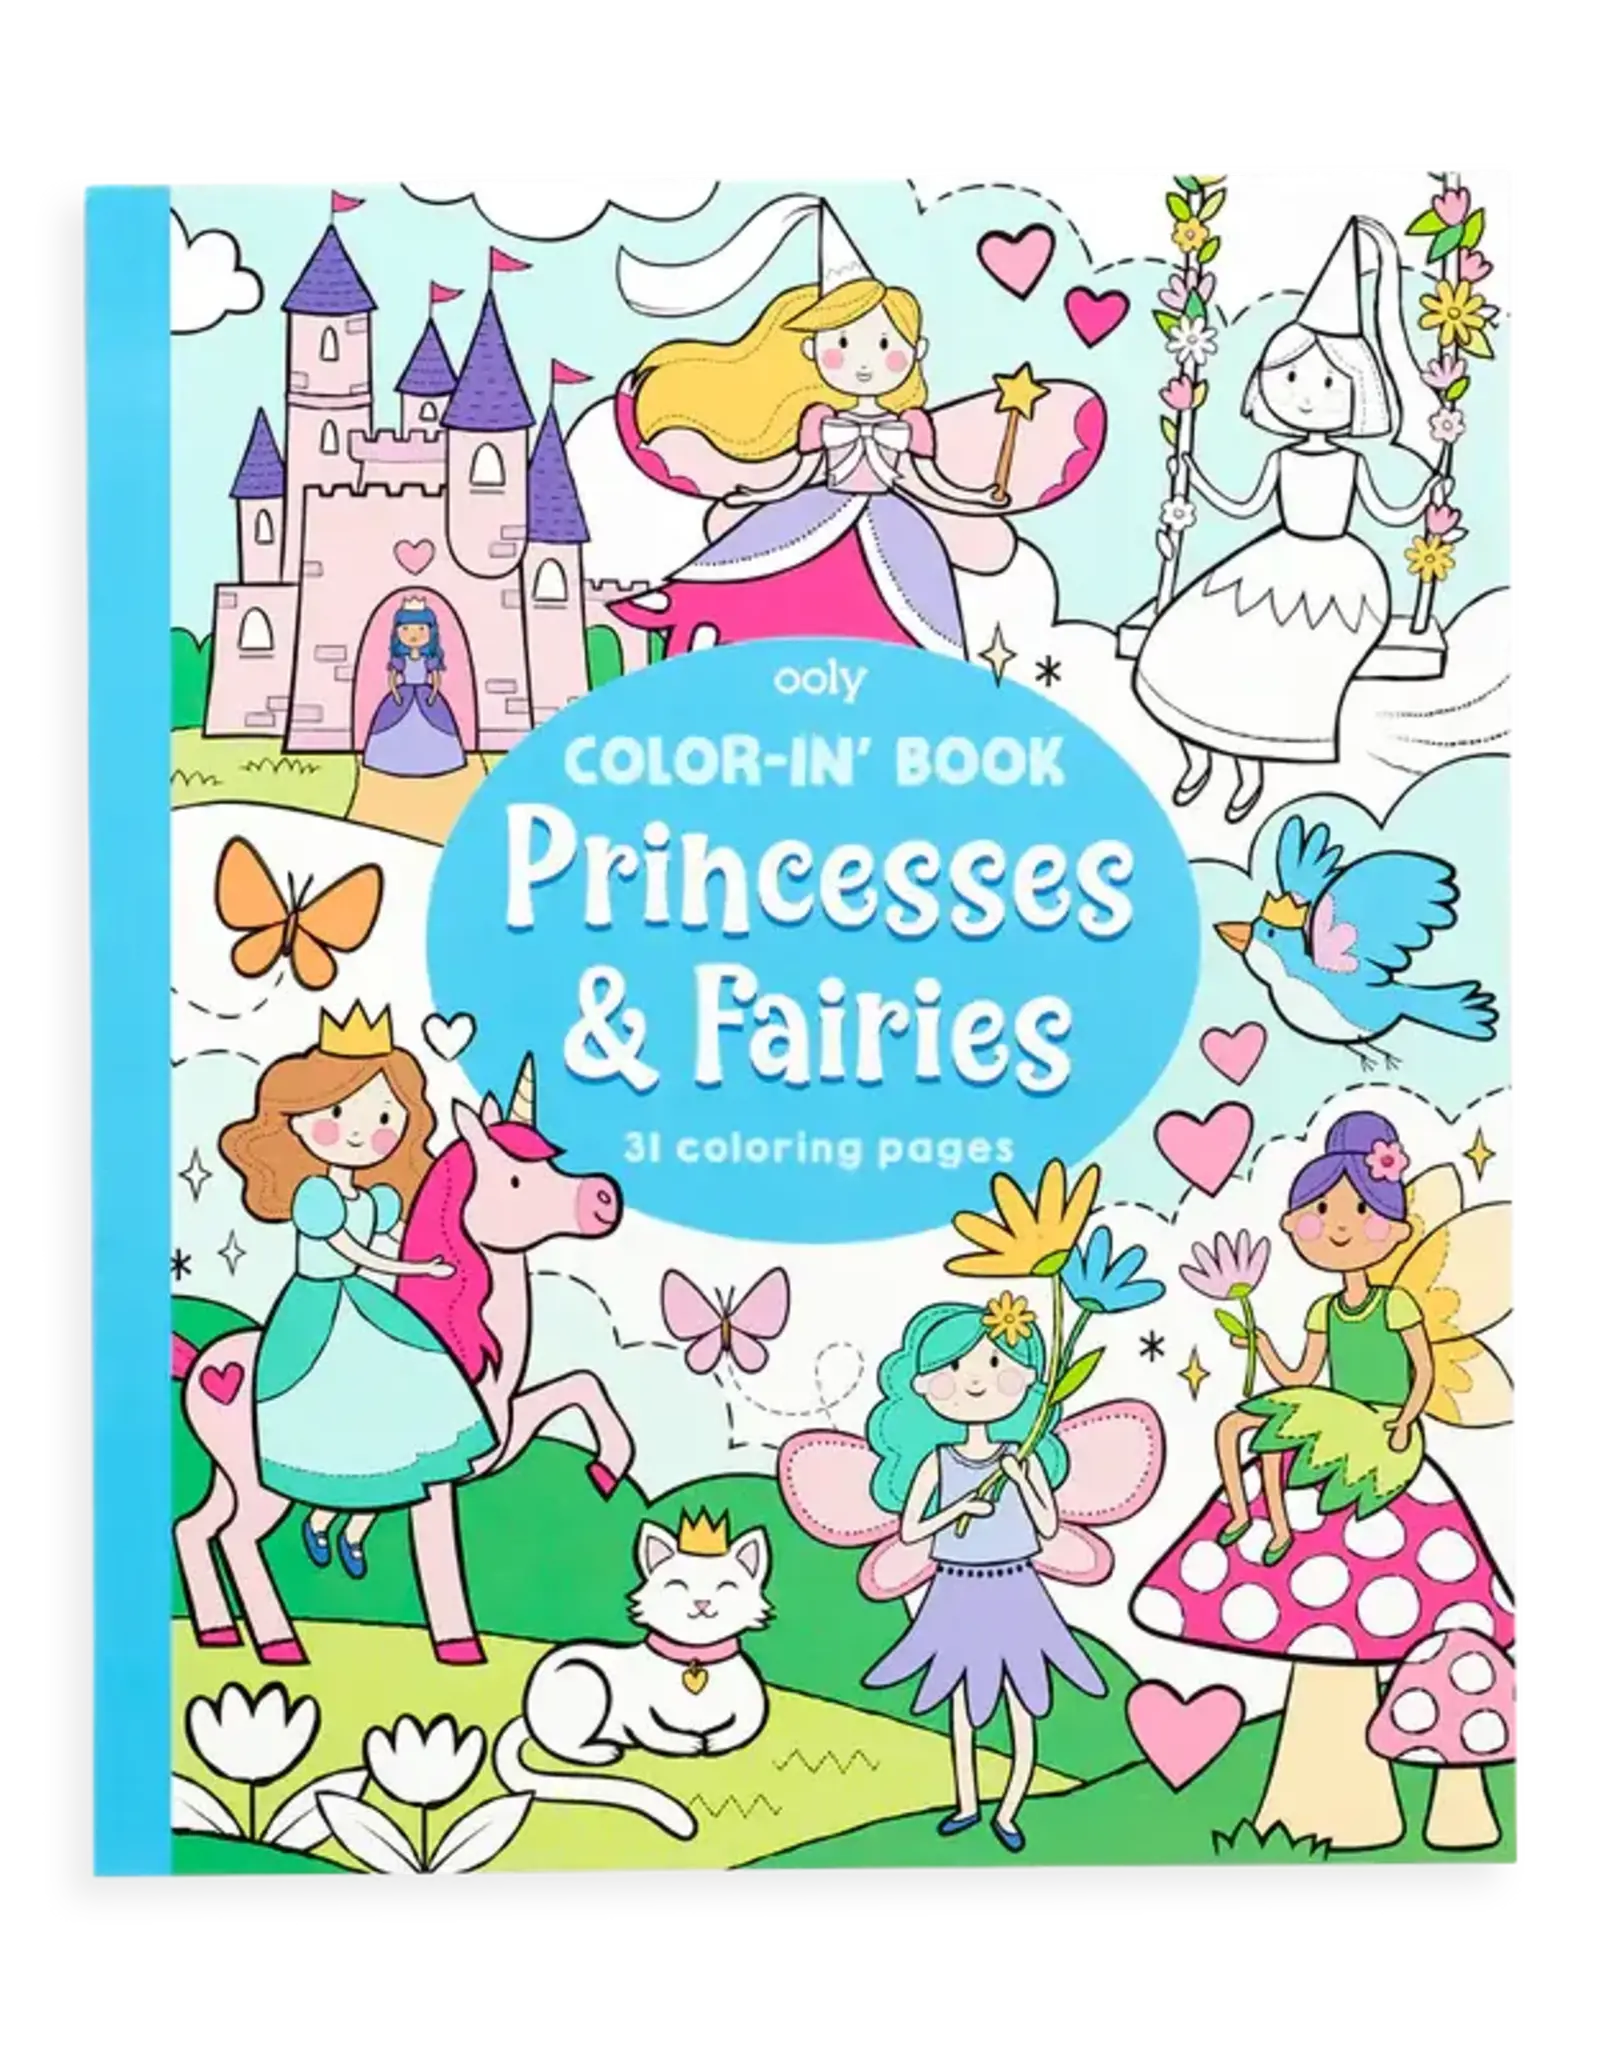 Ooly Color'In Book Princess & Fairies